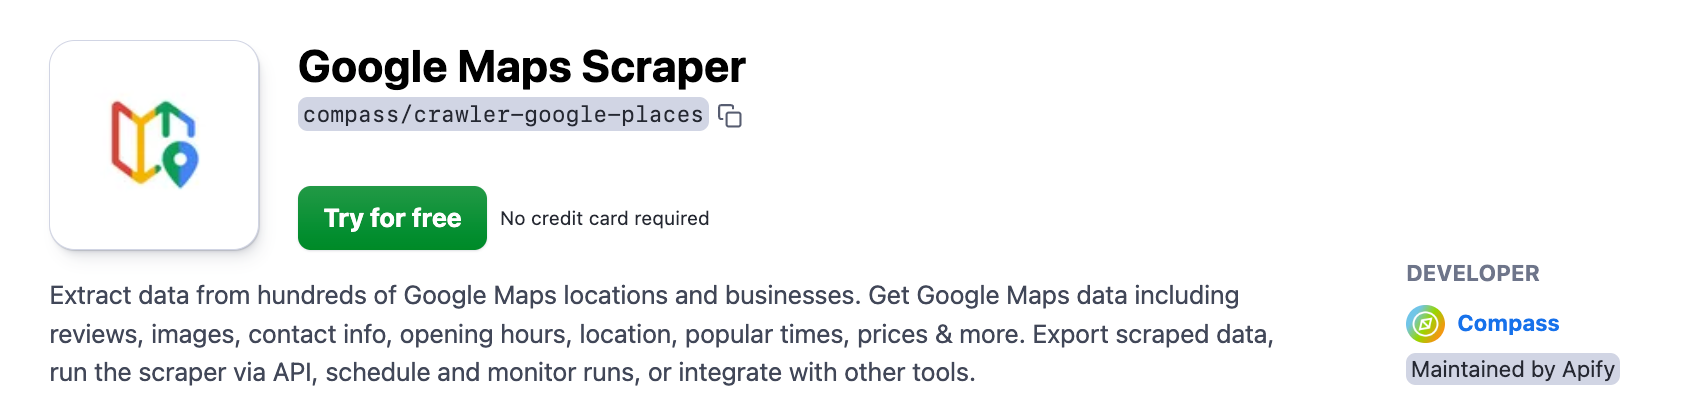 Google Maps Scraper's page on Apify Store.